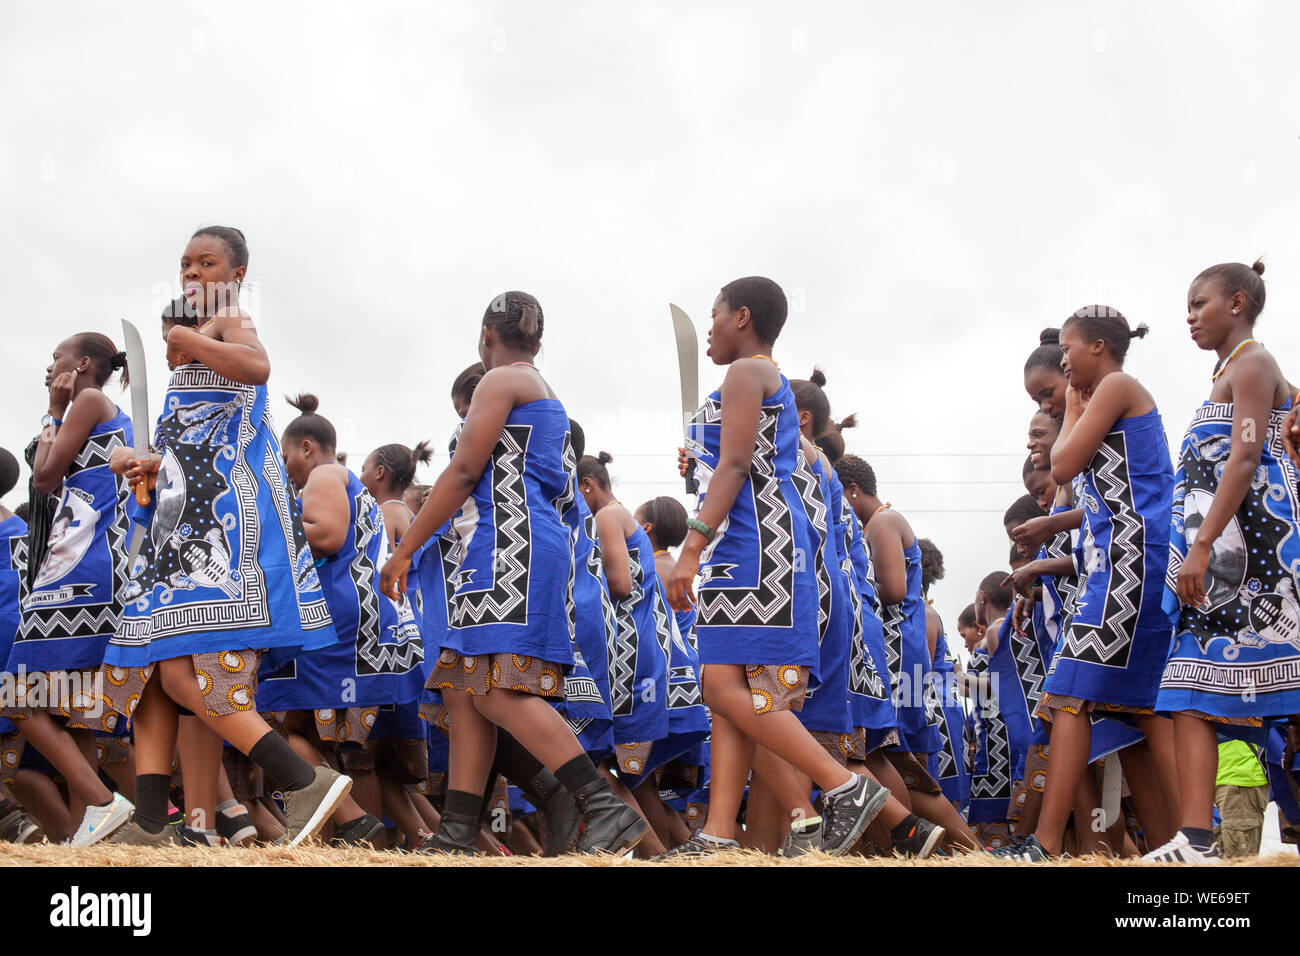 Mbabane, Swaziland - August 31, 2017: Umhlanga Reed Dance ceremony traditional rite young virgin girls with big knives machete go to field to cut reed Stock Photo